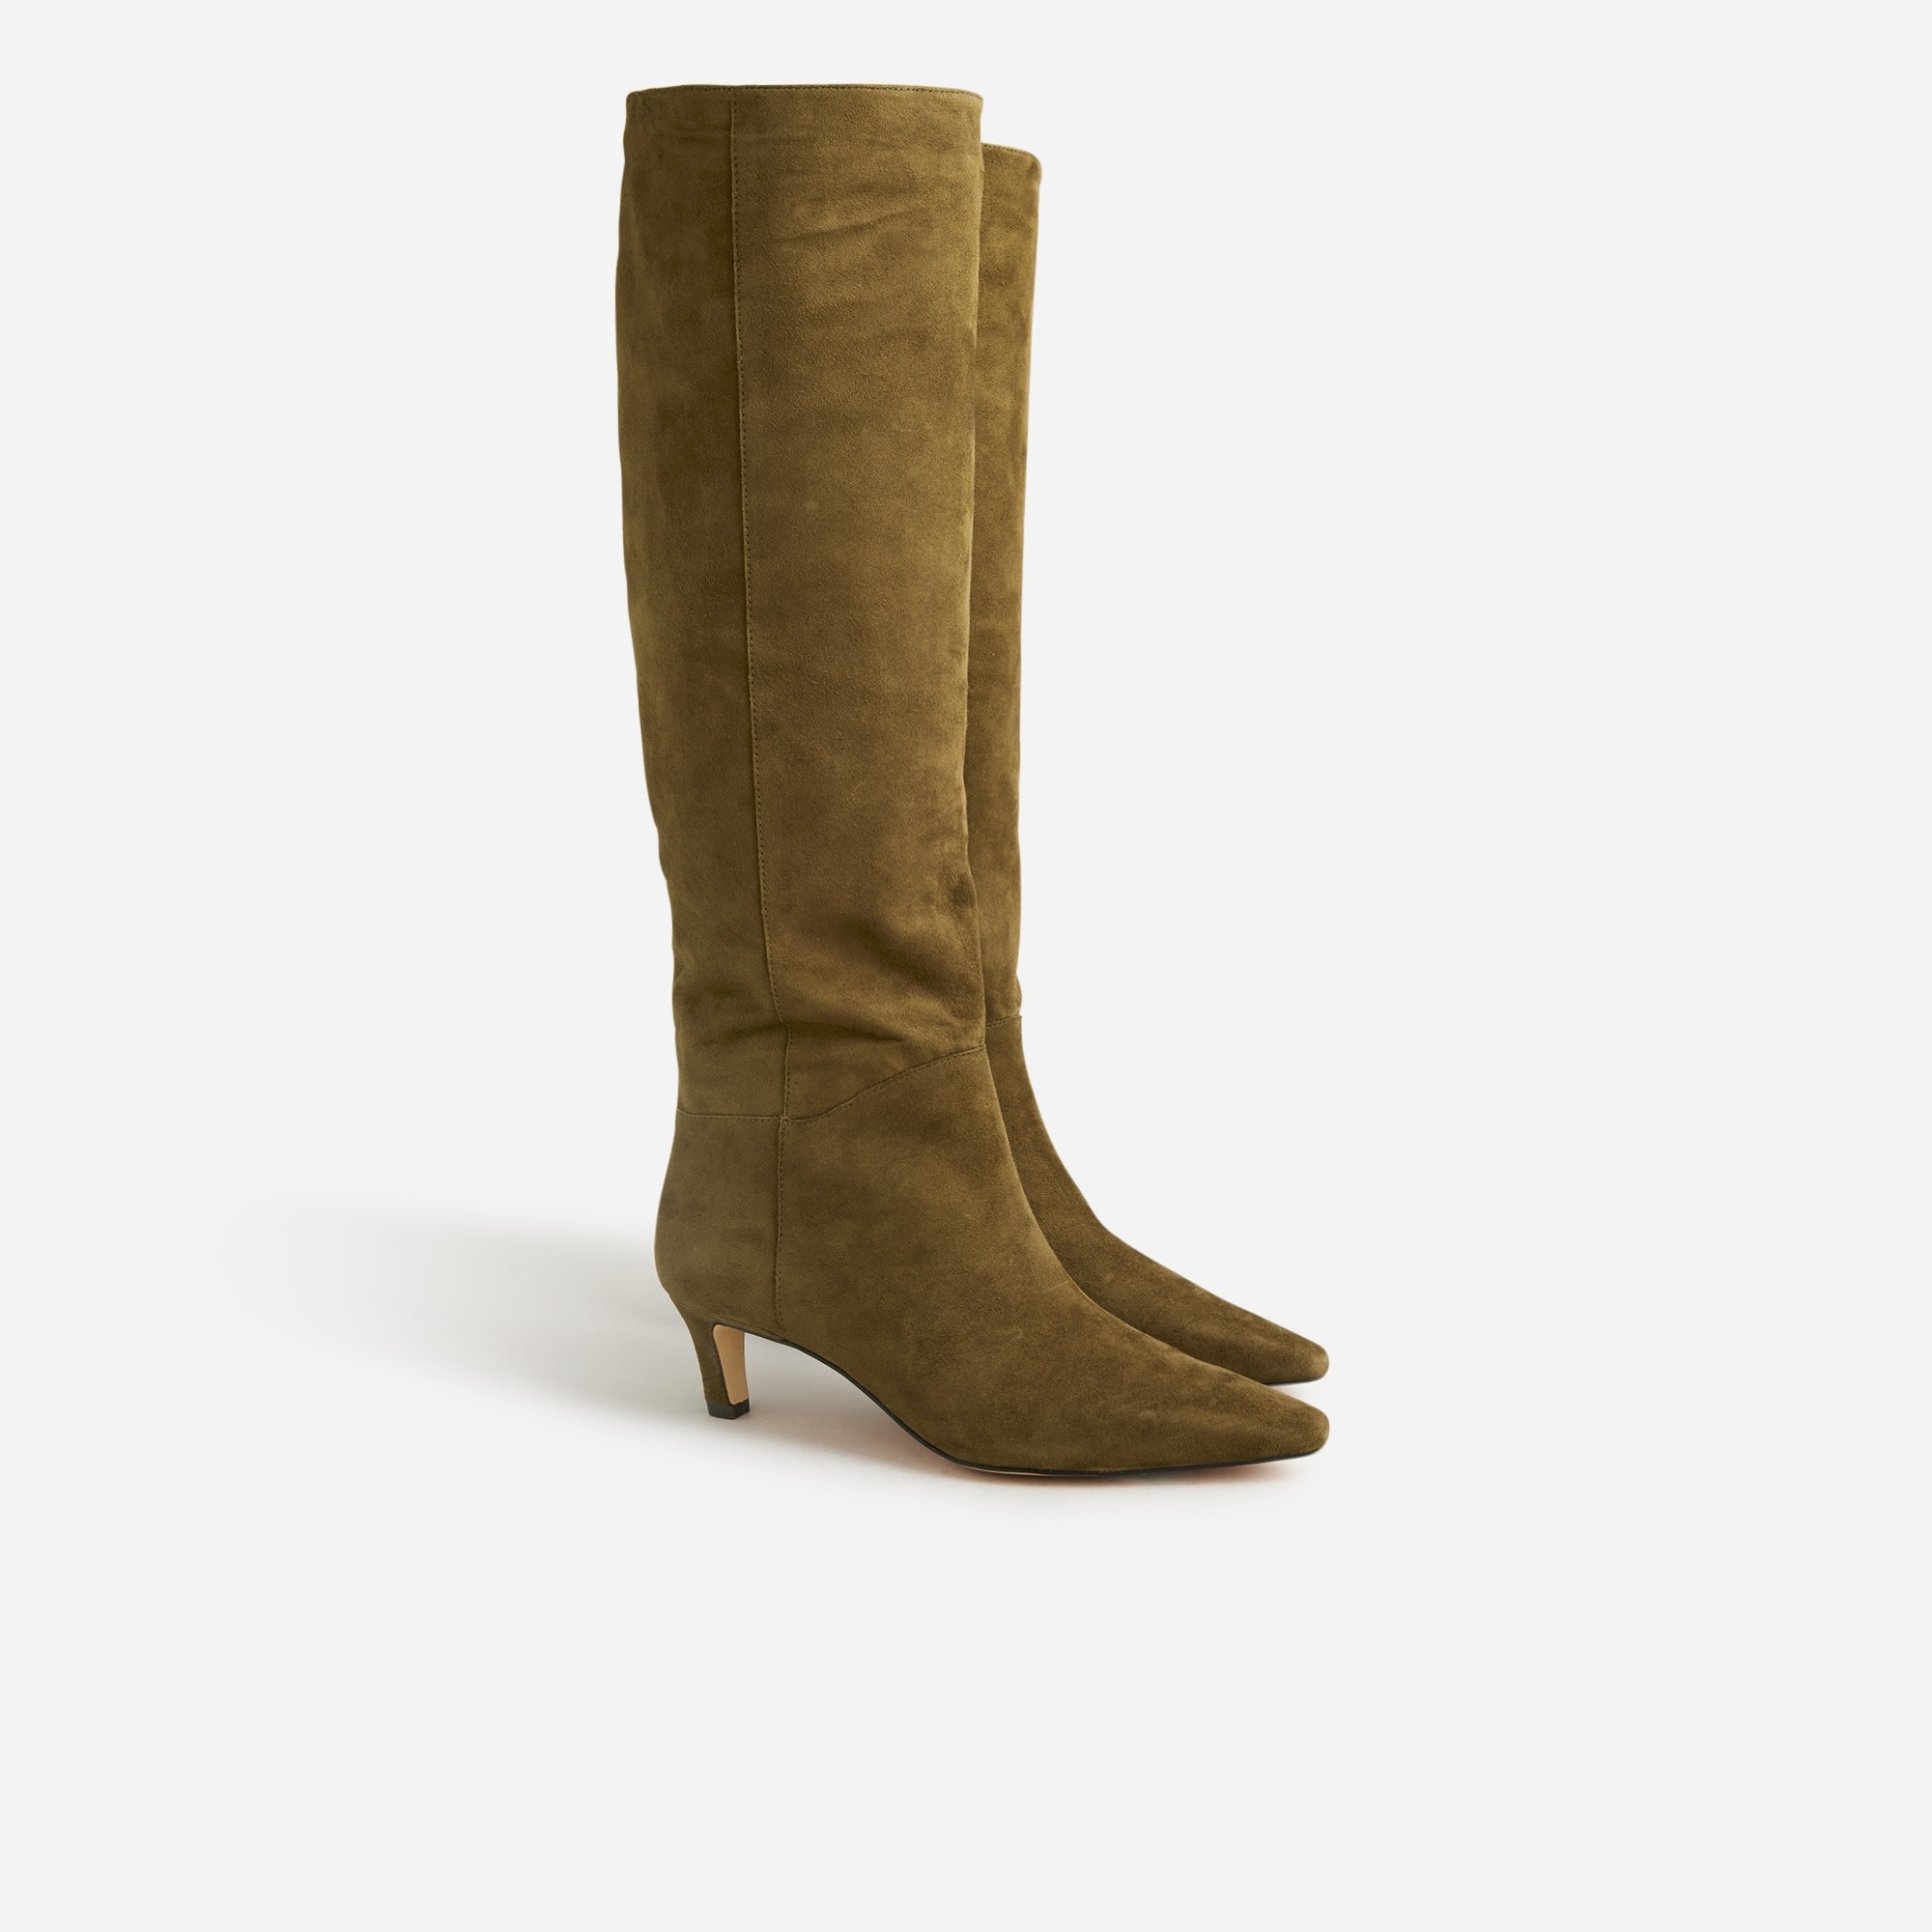  Stevie knee-high boots in suede